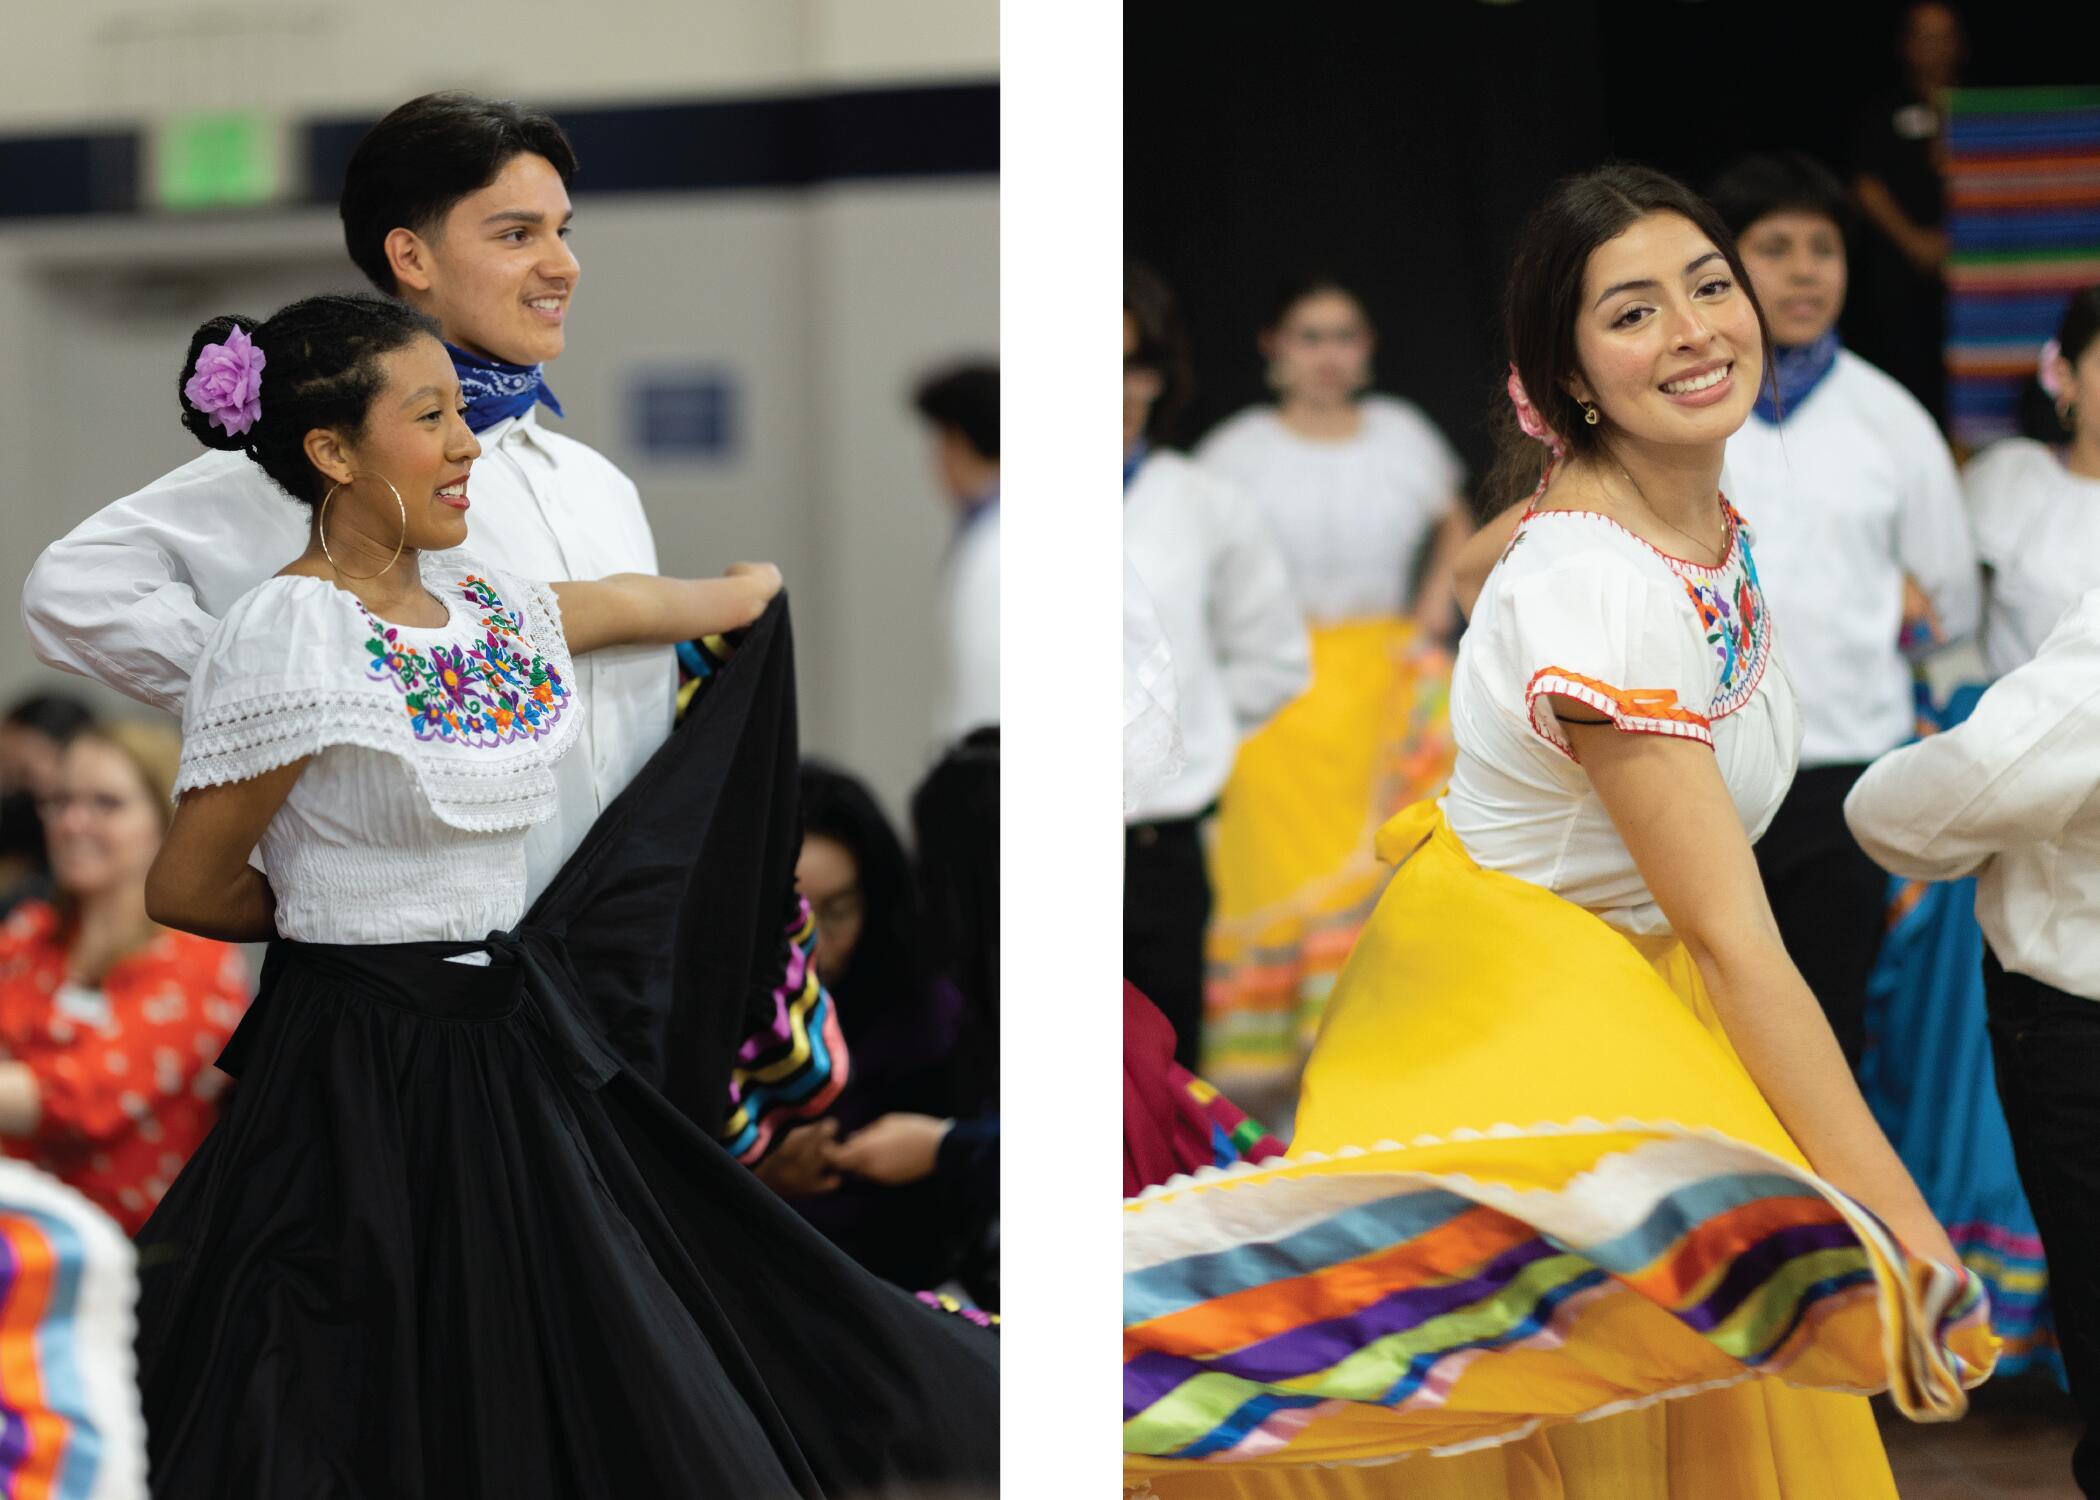 Notre Dame and Bellarmine folklorico group performing cultural dances